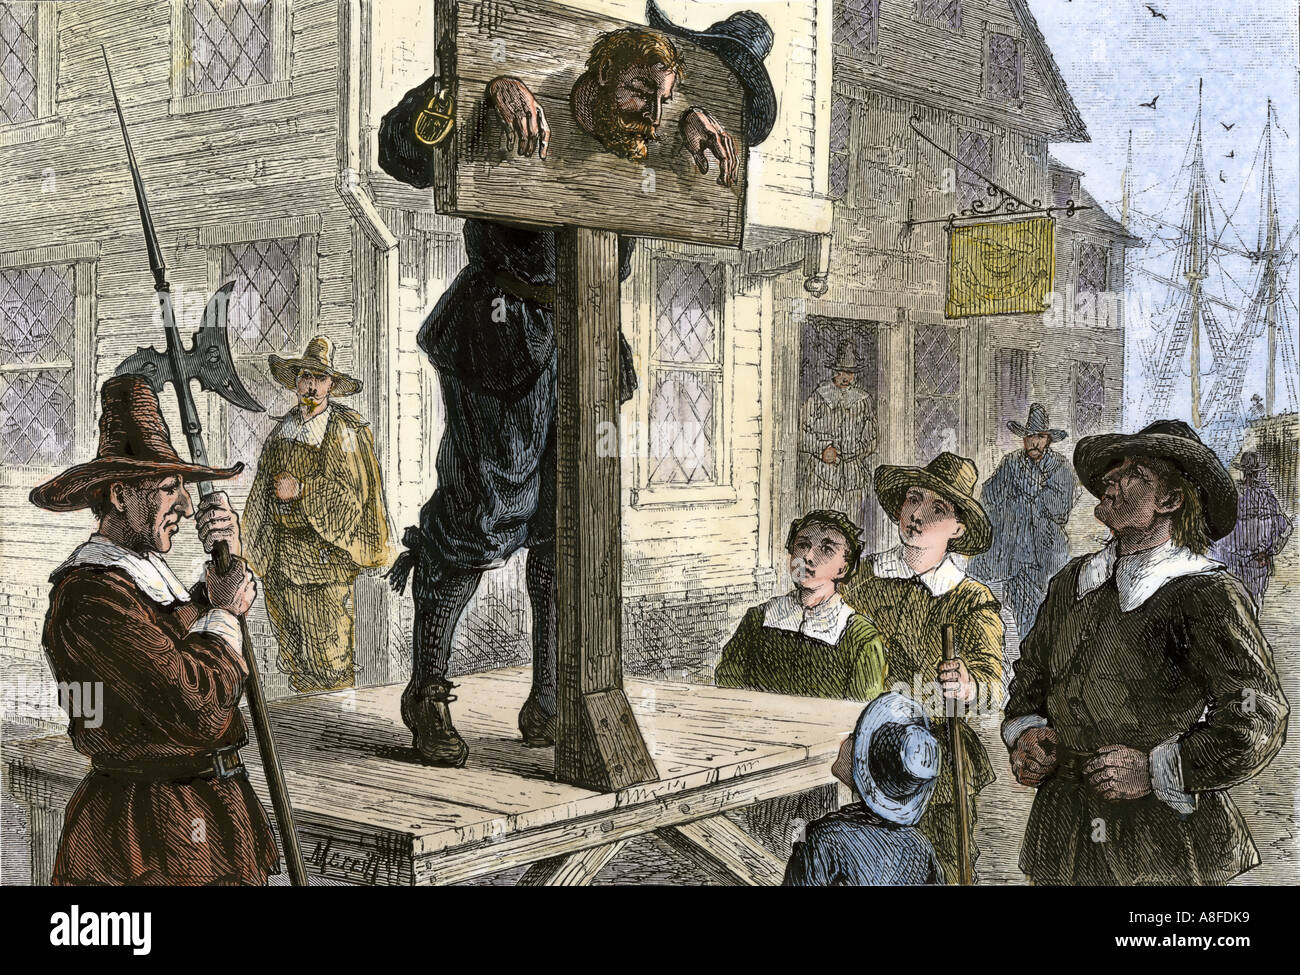 Offender punished by standing in the pillory in a Puritan seaport town 1600s. Hand-colored woodcut Stock Photo